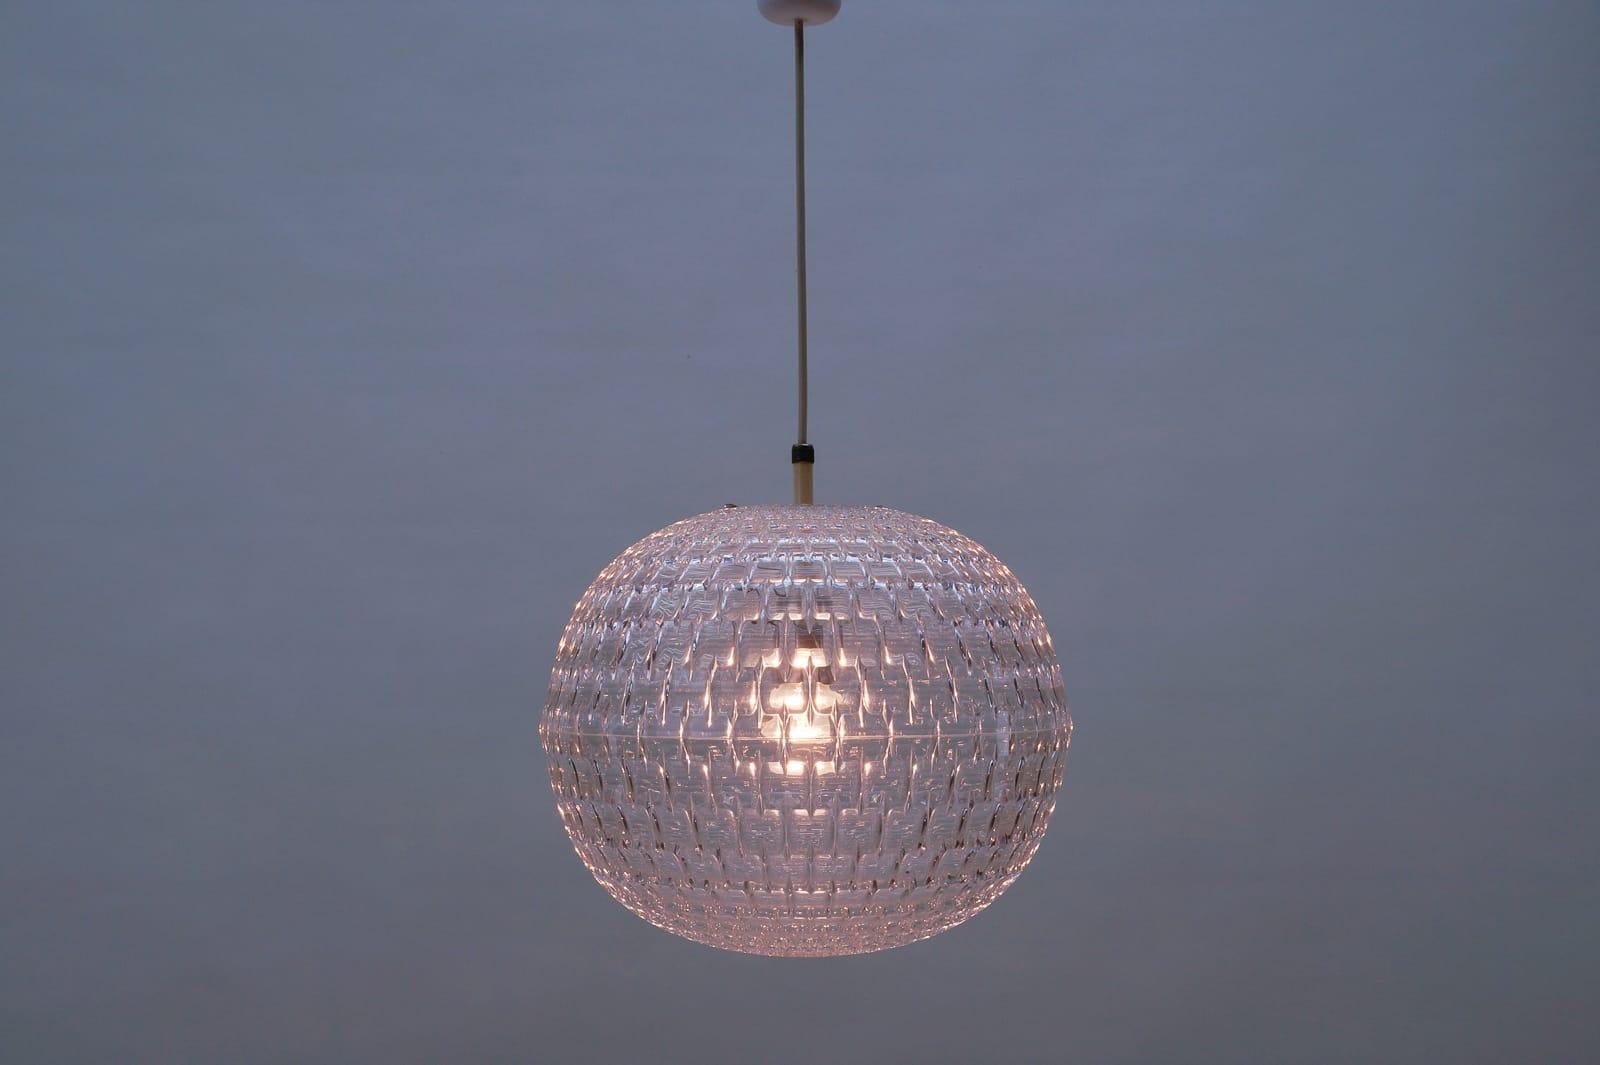 German Clear Acrylic Pendant Lamp by Aloys F. Gangkofner for Erco Leuchten, 1960s For Sale